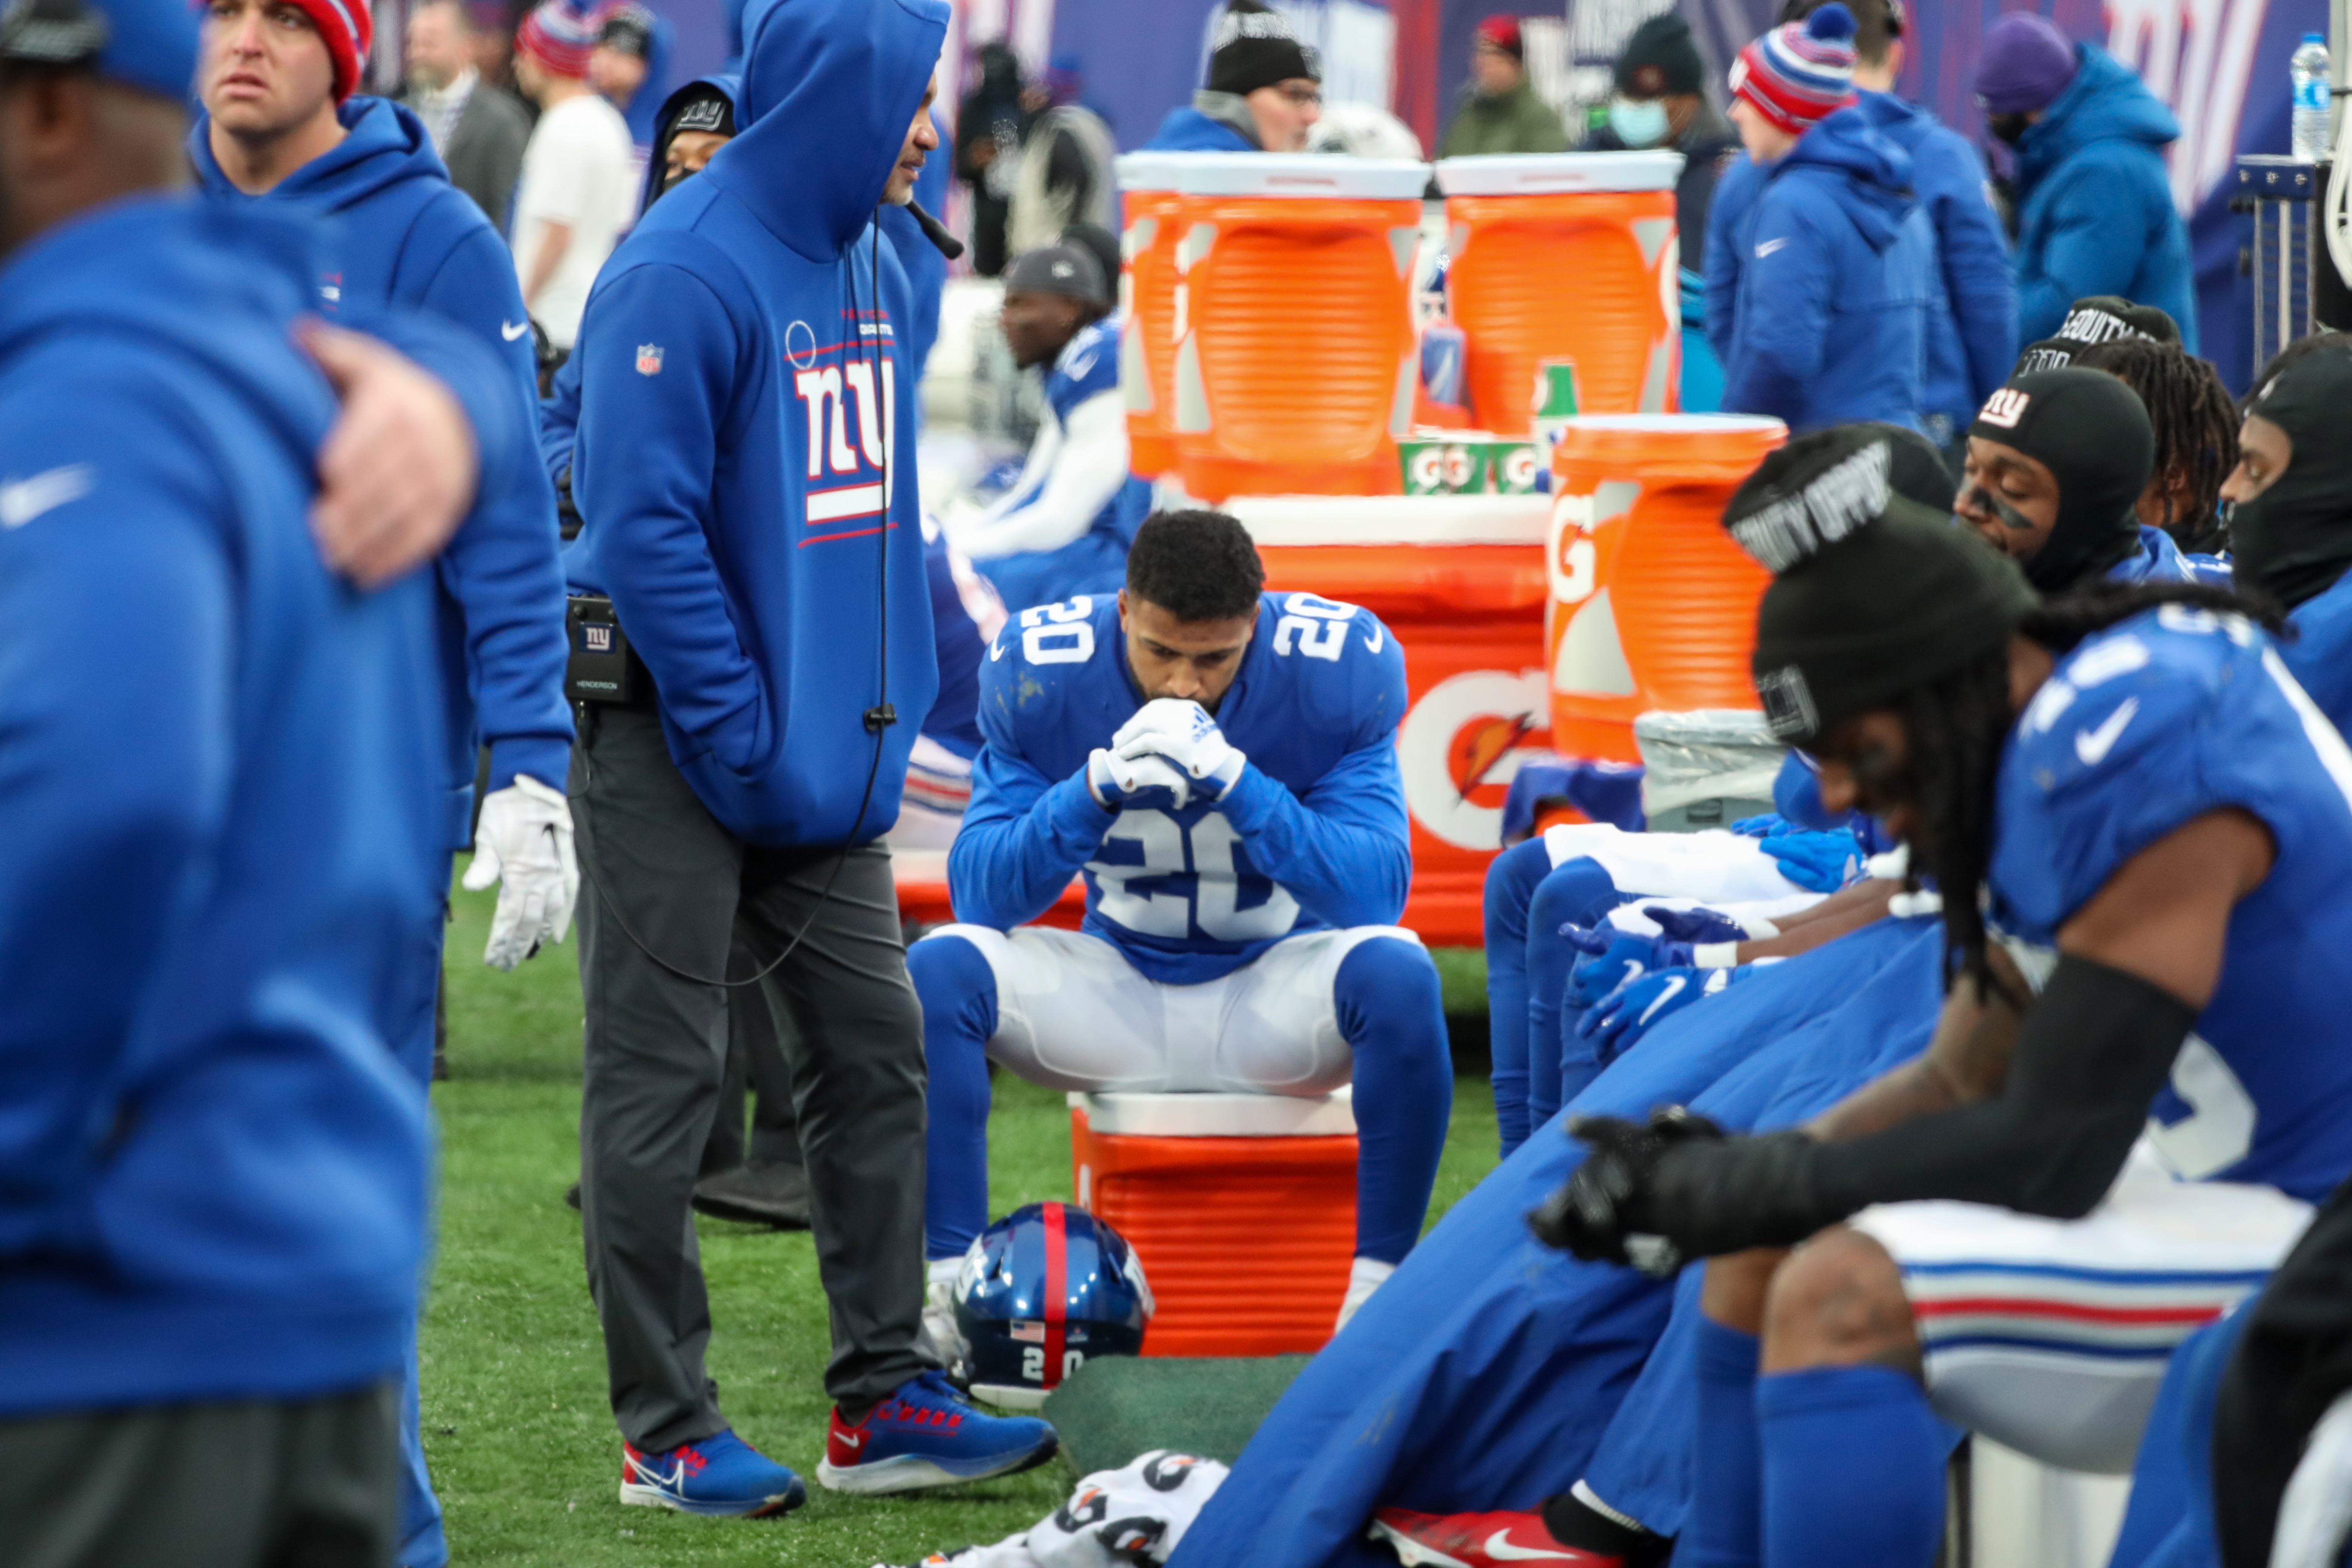 New York Giants cornerback Julian Love (20, center) sits on the Giants bench late in the fourth quarter against the Washington Football Team on Sunday, Jan. 9, 2022 in East Rutherford, N.J. Washington won, 22-7.